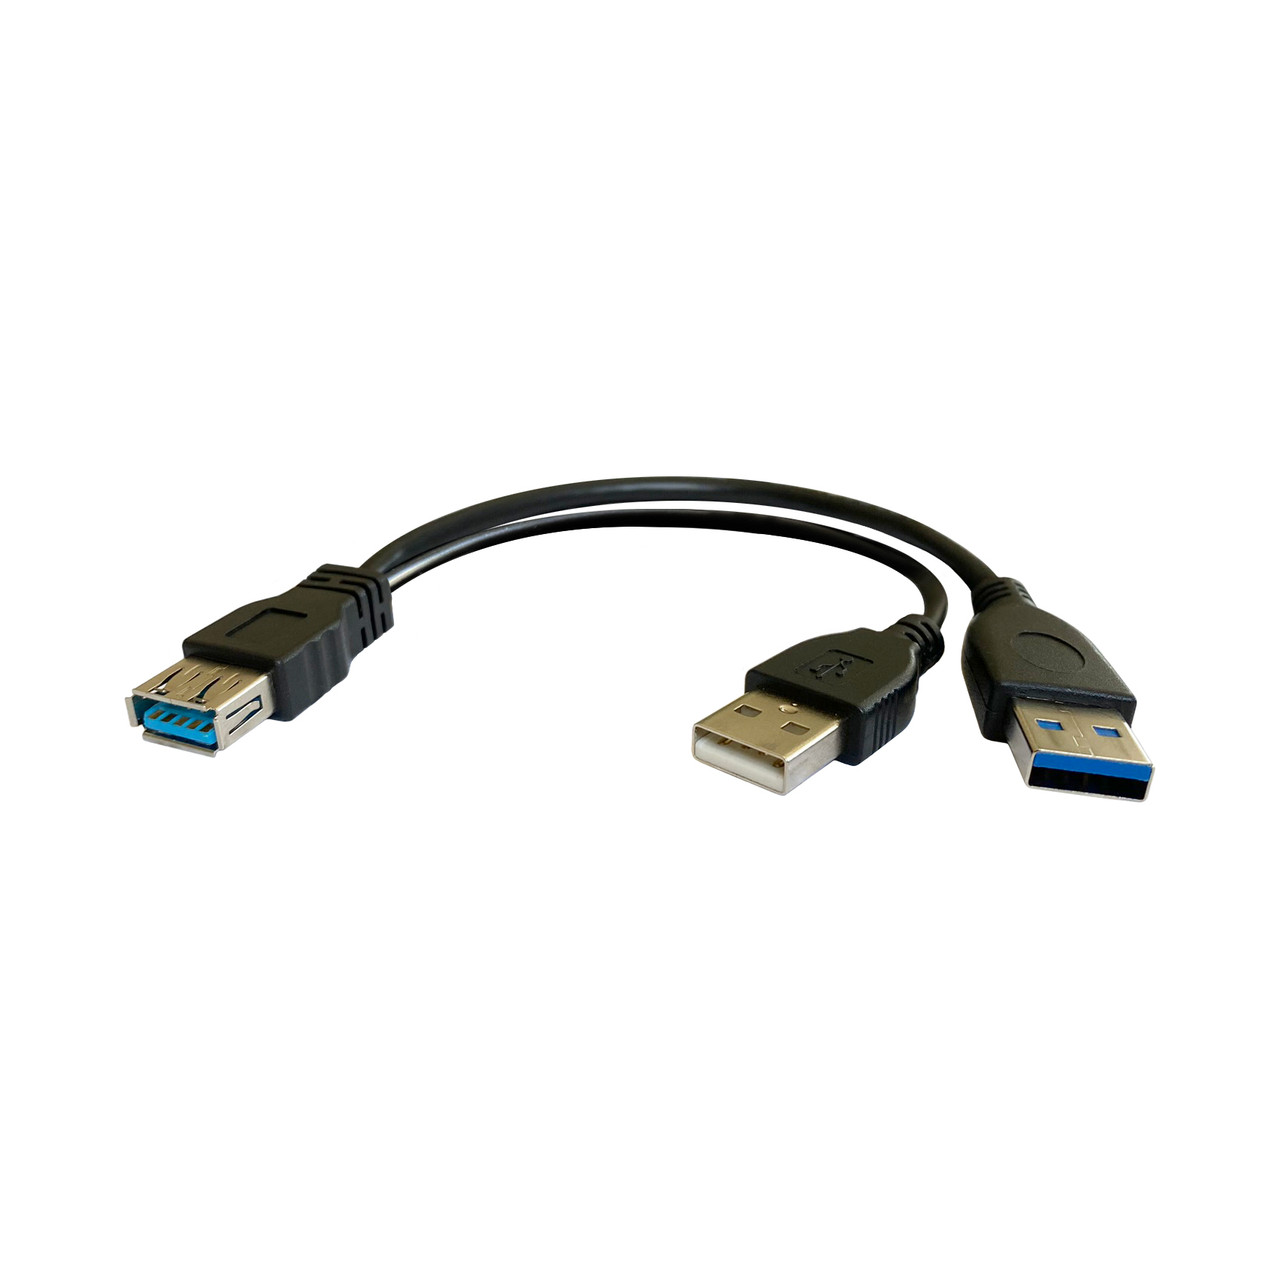 USB Type-A Male to Mini USB Male Extra Long Plug Cable V3 Cord For